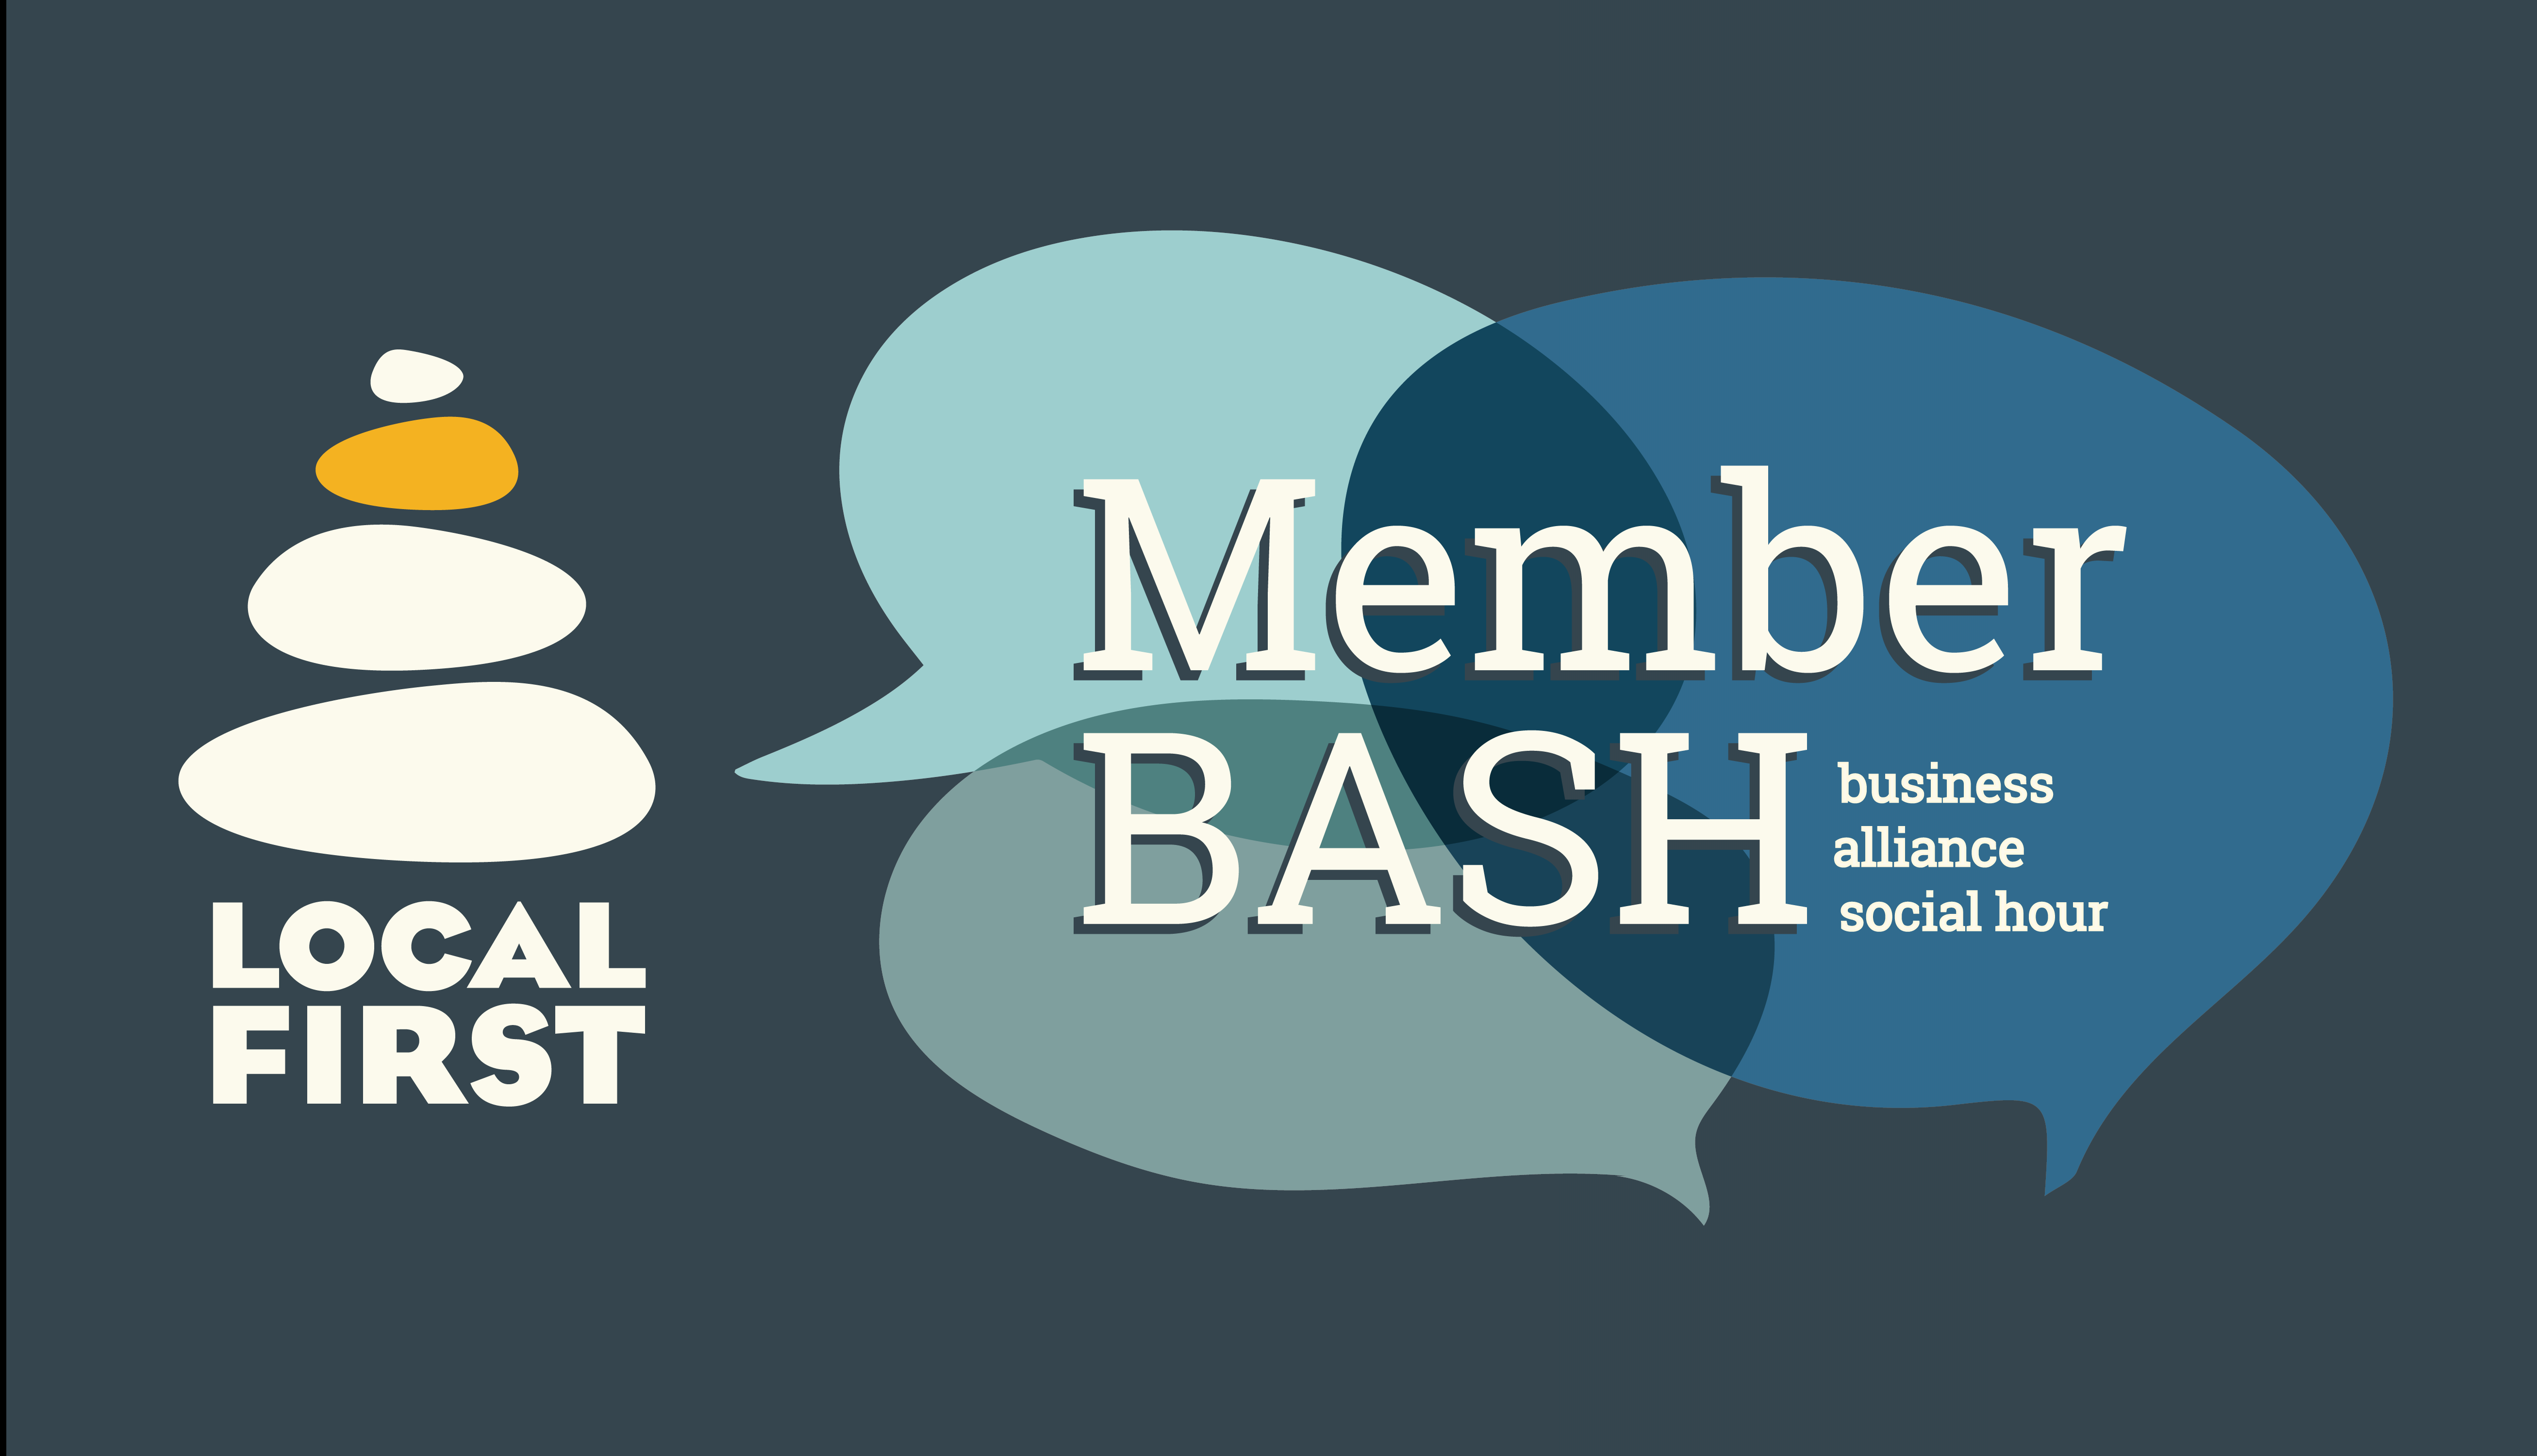 Local First Member Business Alliance Social Hour